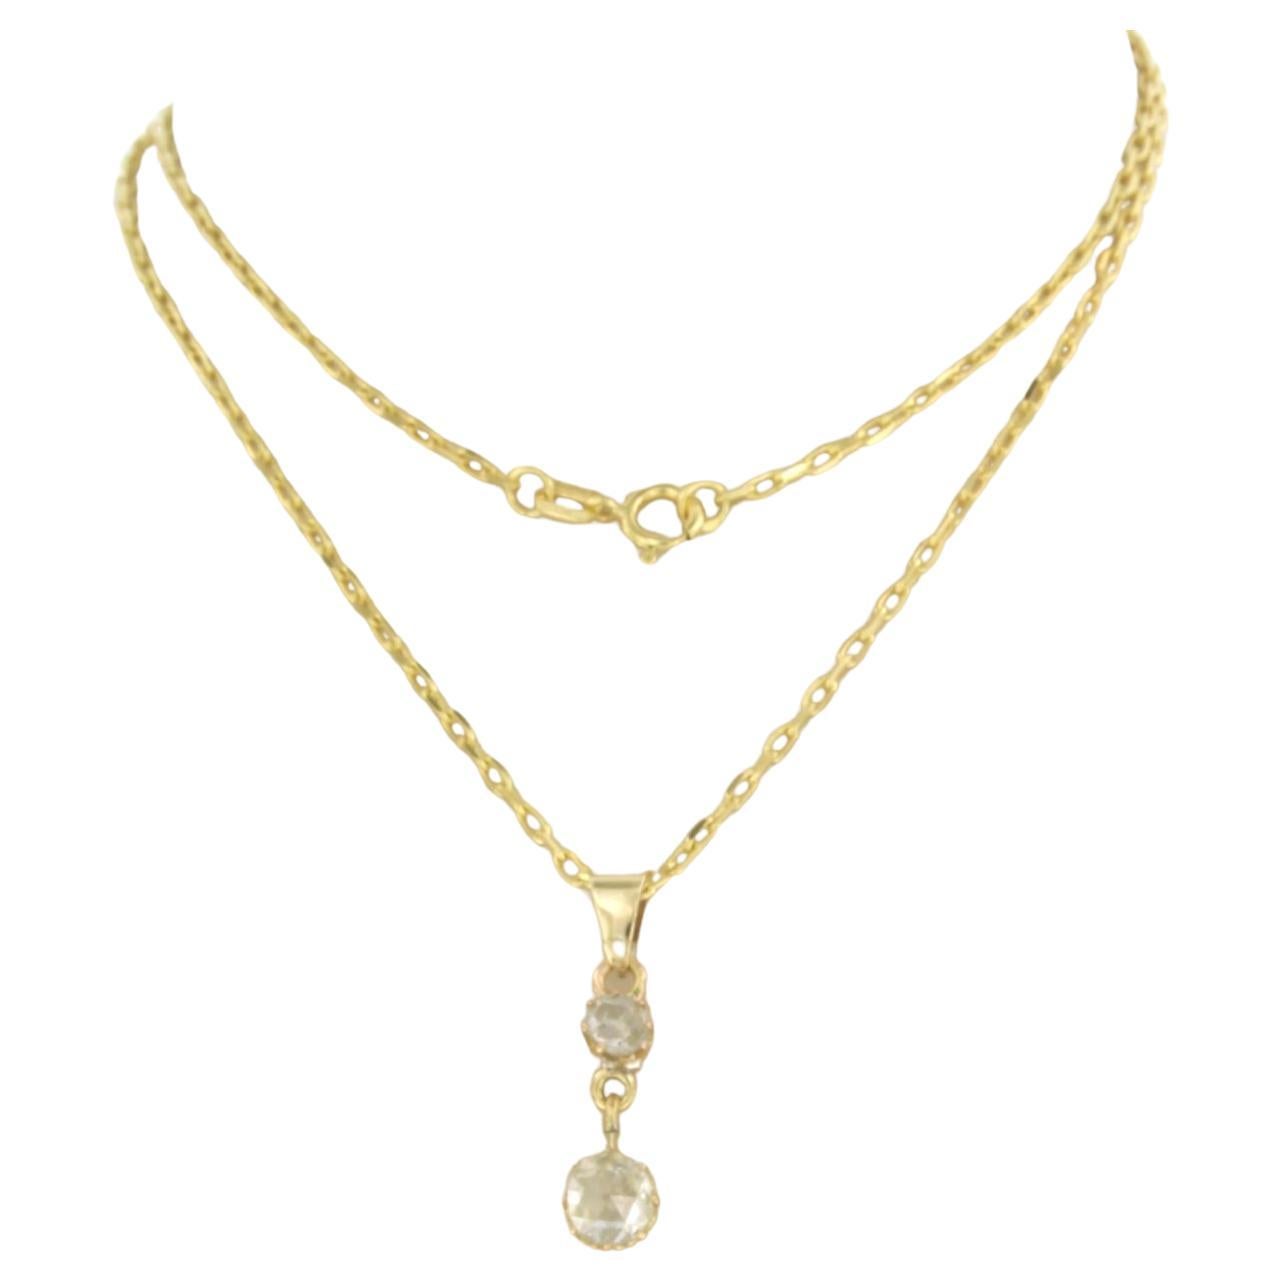 Chain with pendant with diamonds 14k yellow gold